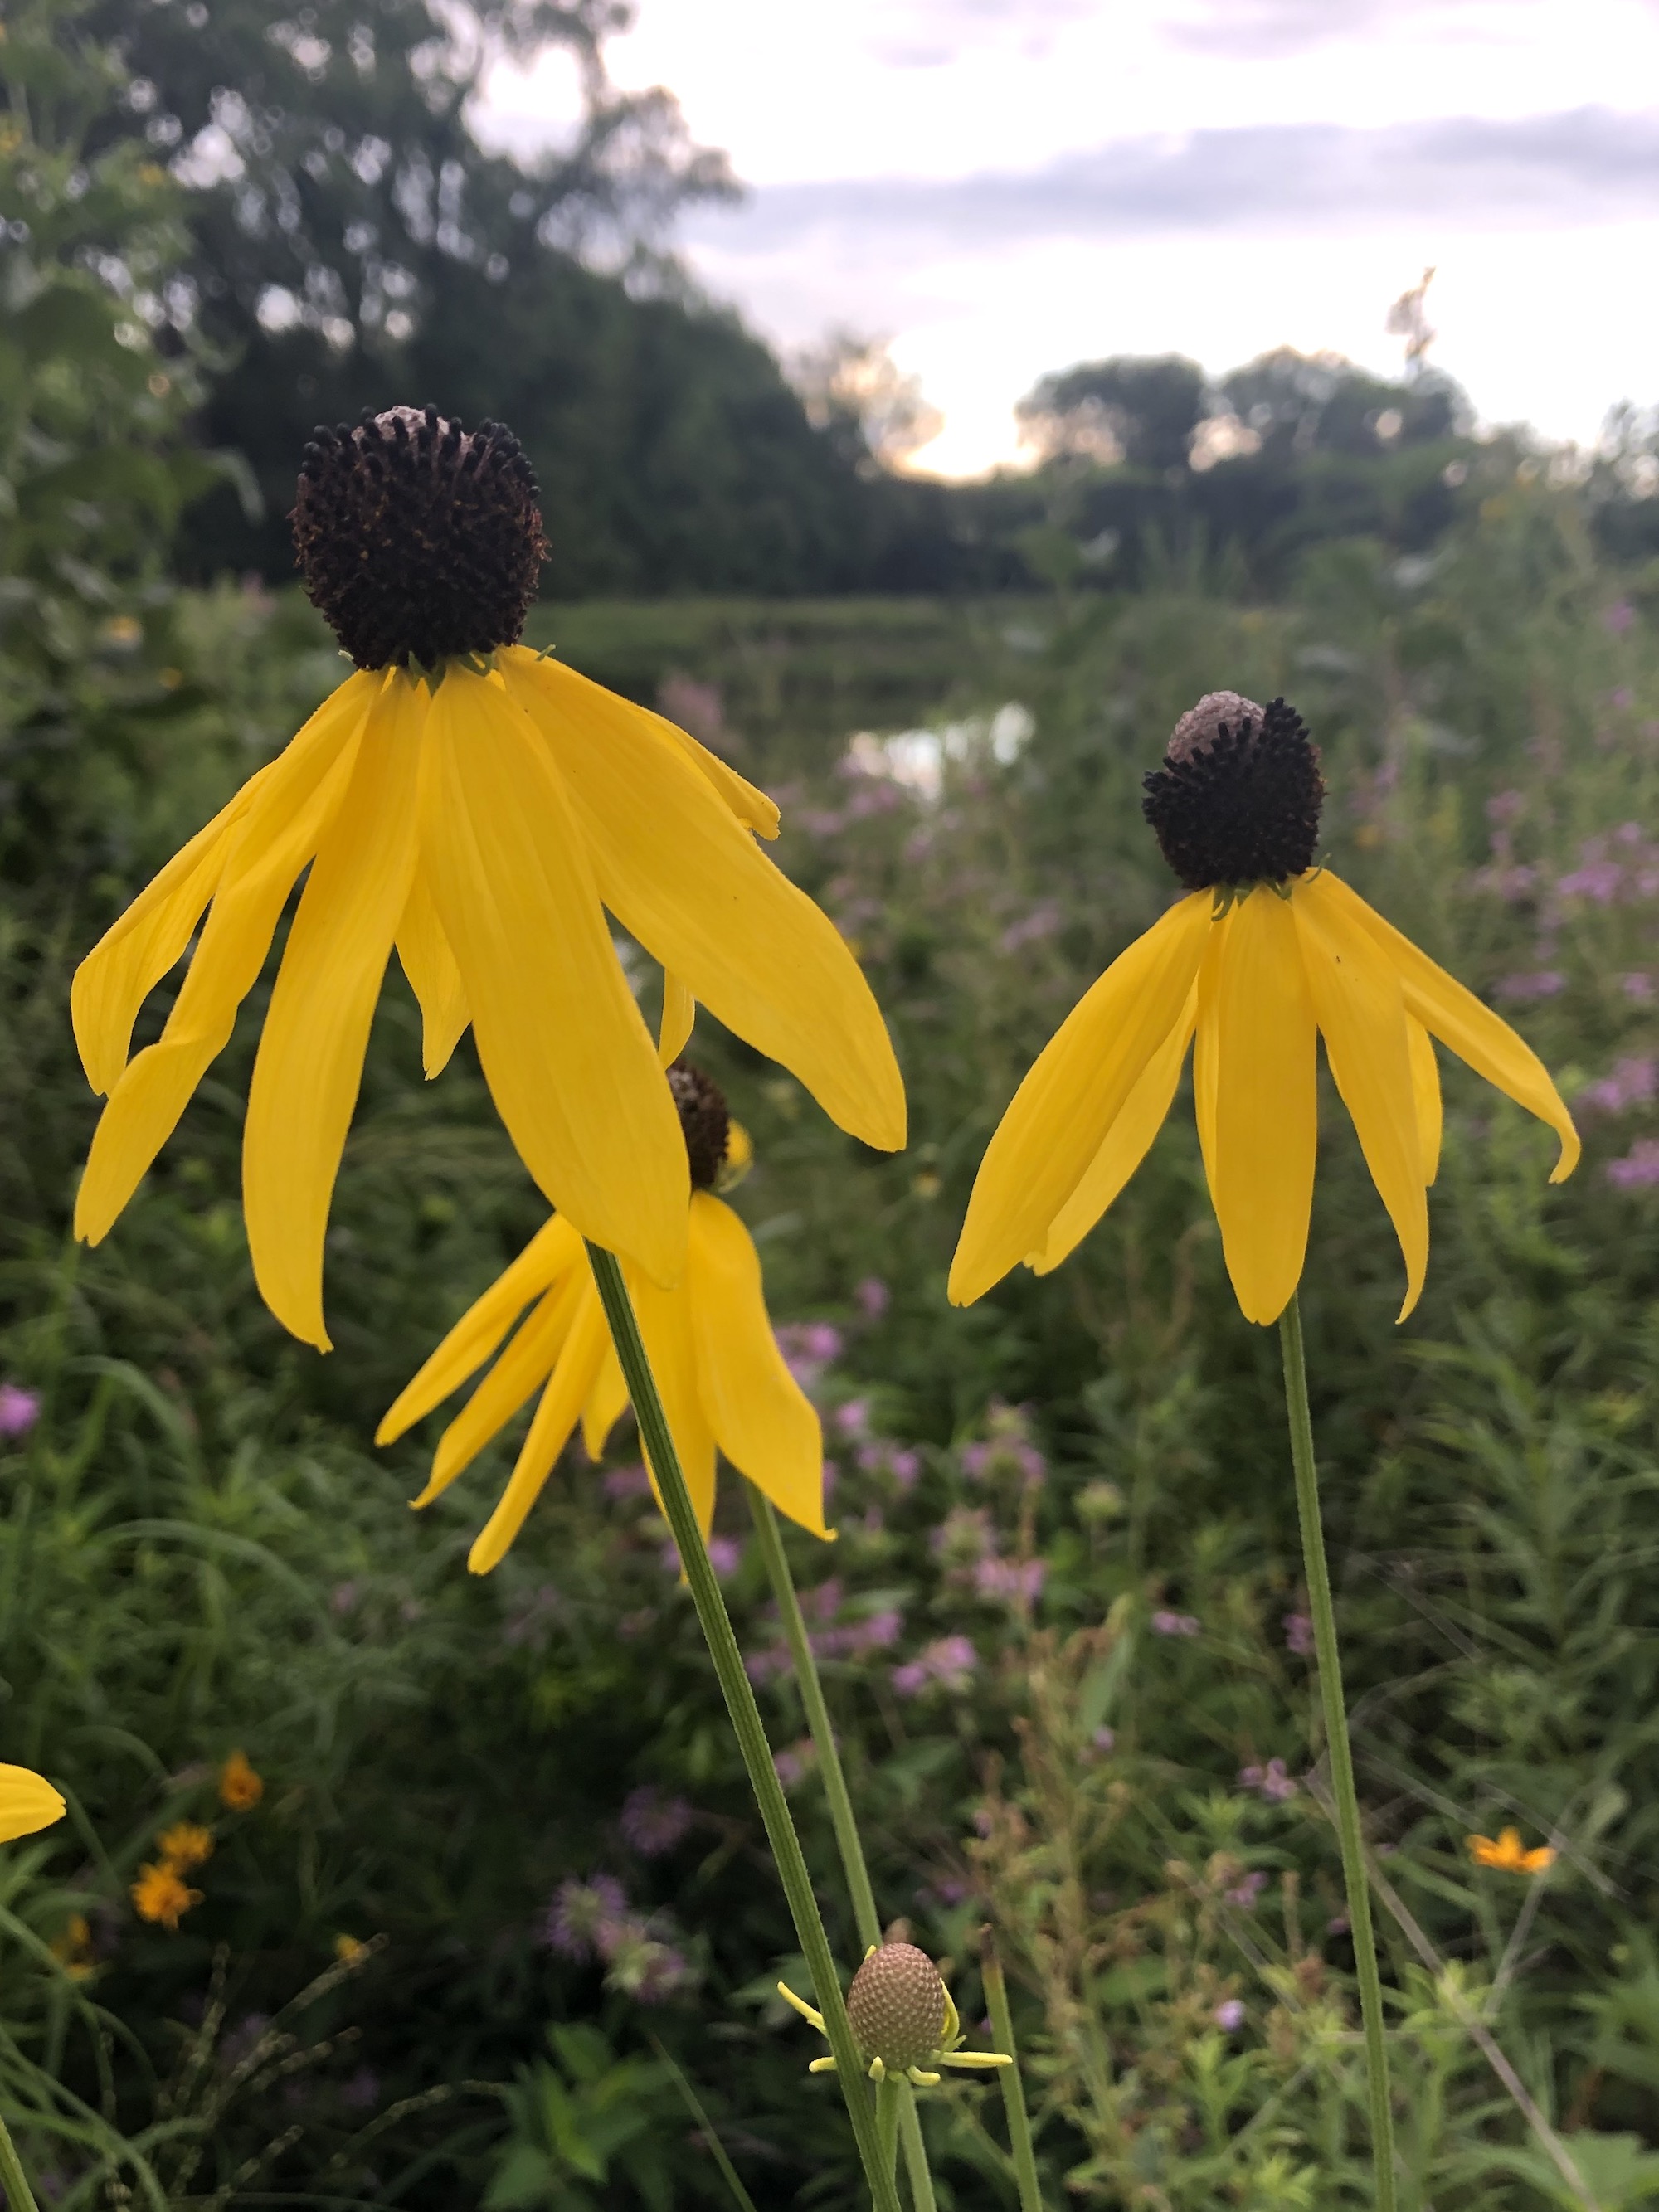 Gray-headed coneflower on shore of Marion Dunn Pond  in Madison, Wisconsin on July 28, 2020.